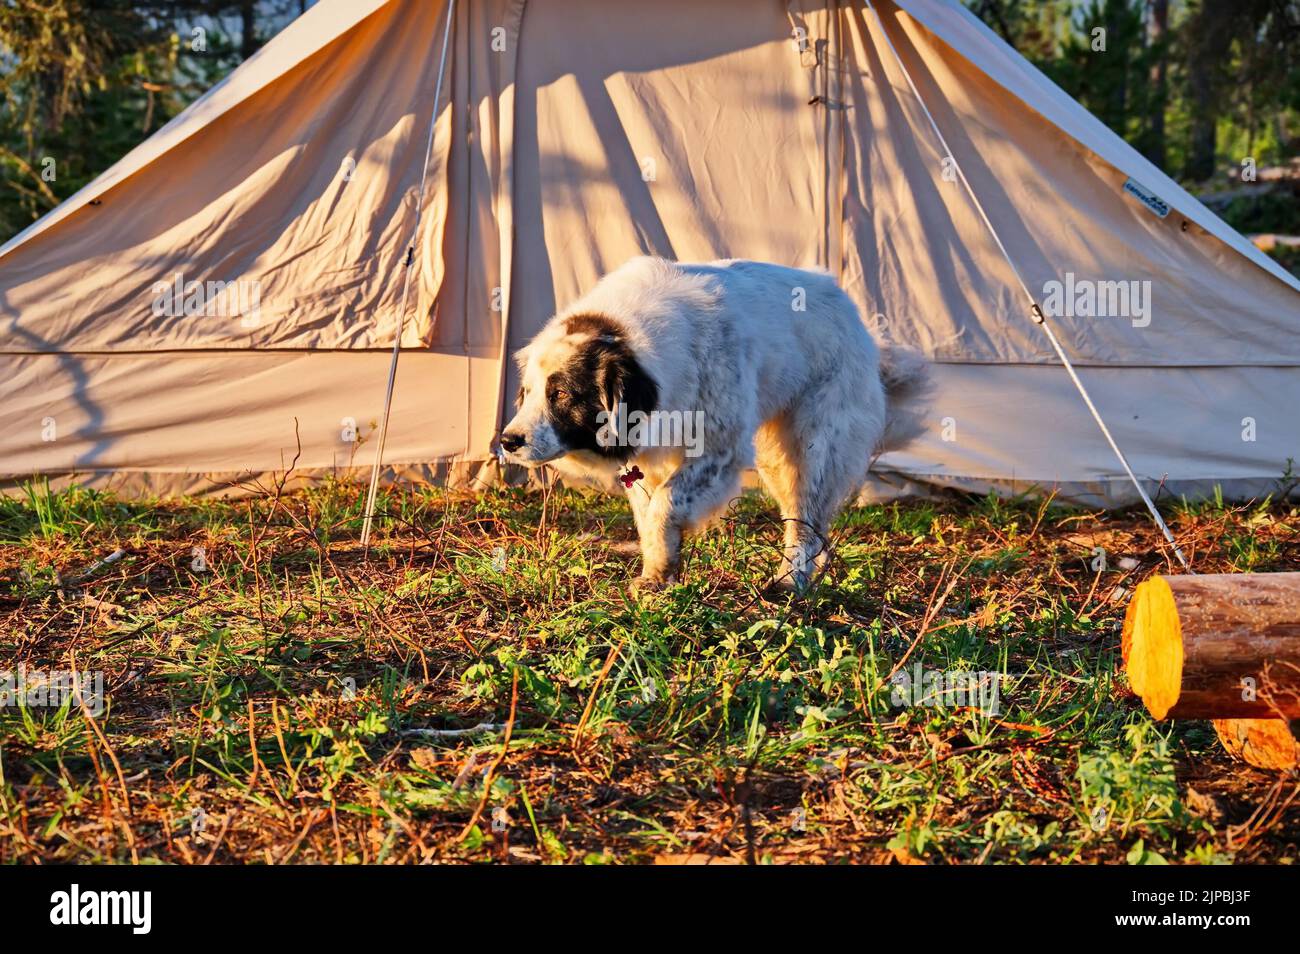 Big dog in front of the tent Stock Photo